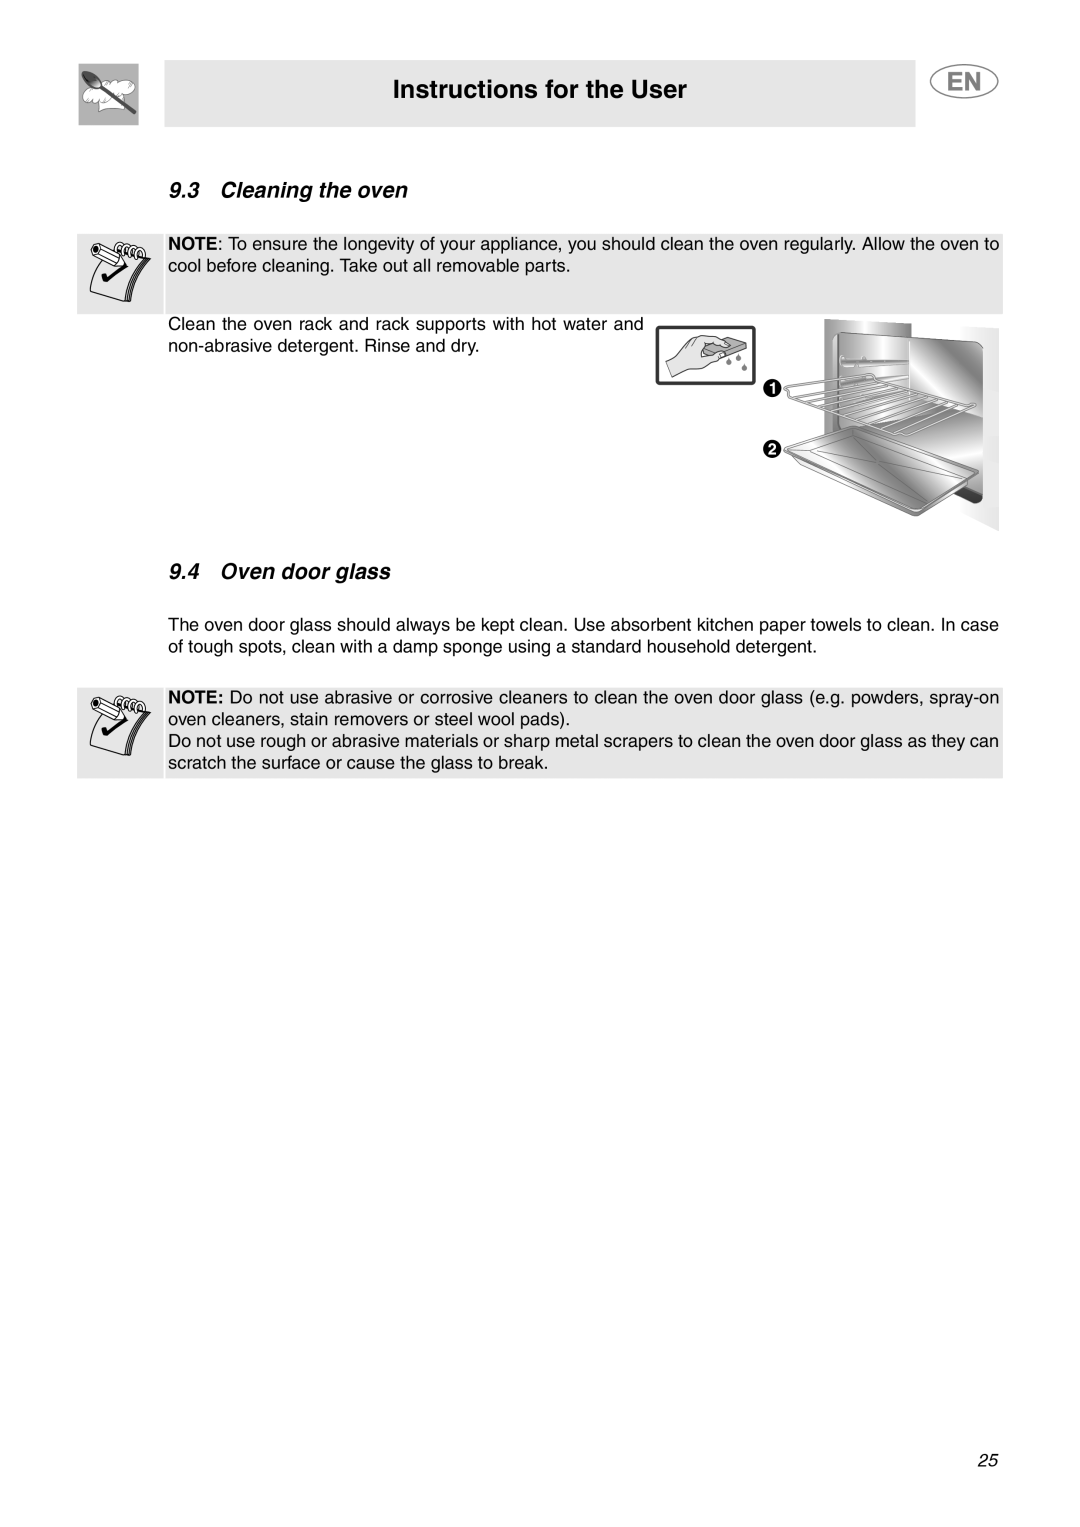 Smeg C9GMXU important safety instructions Cleaning the oven, Oven door glass, Instructions for the User 